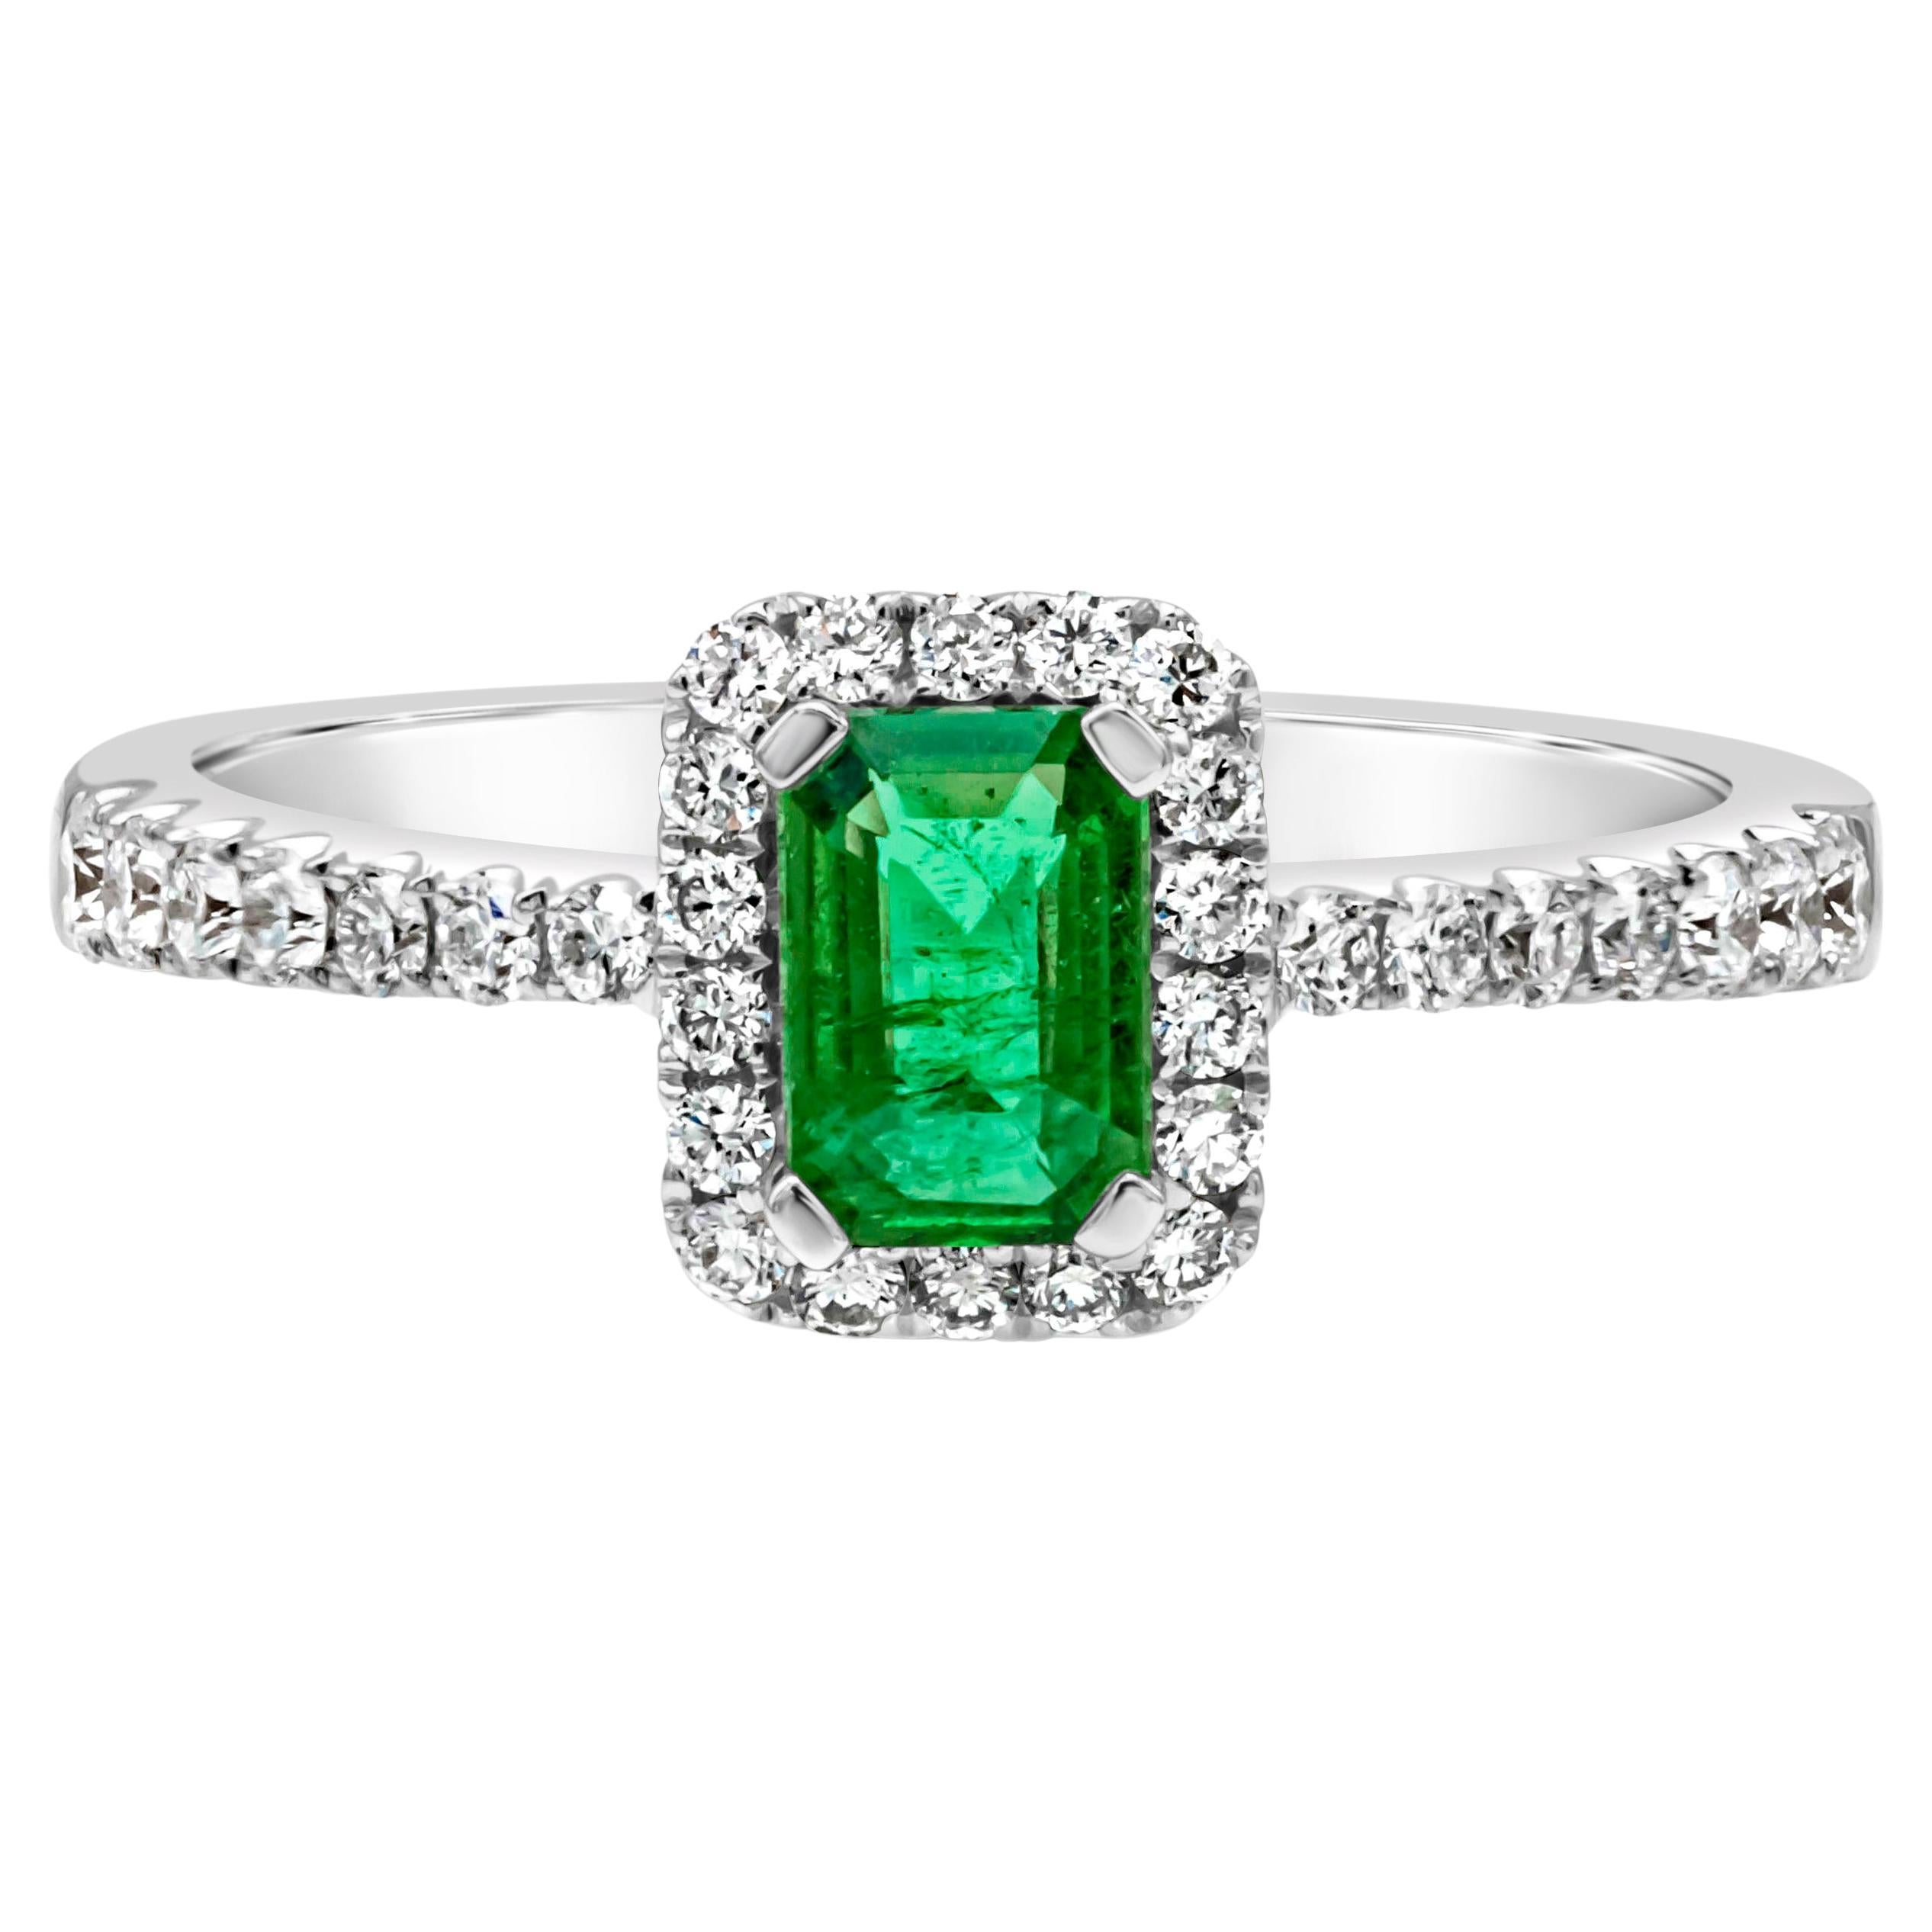 0.49 Carats Total Emerald Cut Green Emerald & Diamond Halo Engagement Ring For Sale